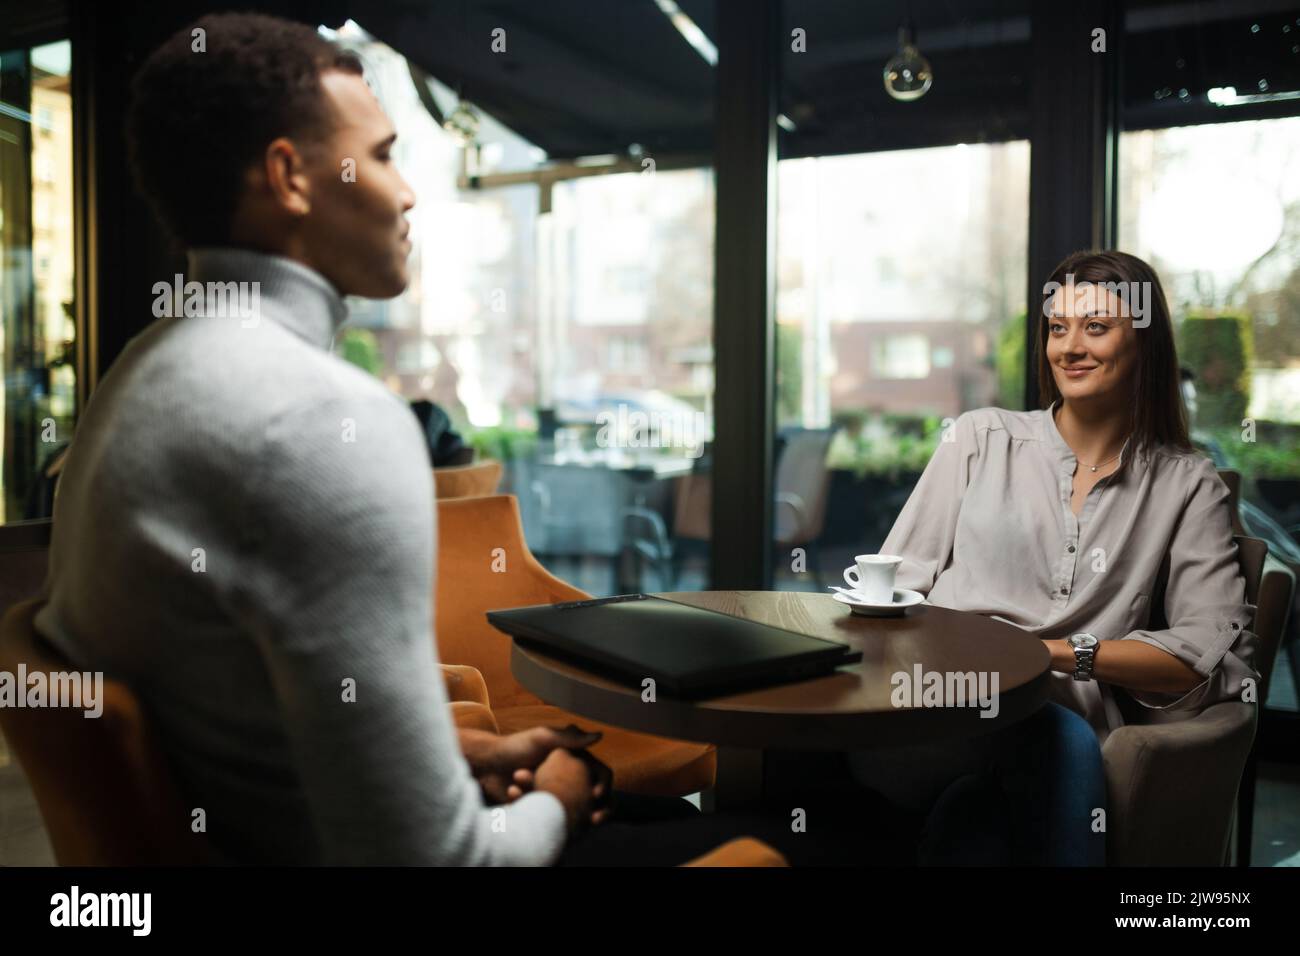 Friends at a cafe after work. Business colleagues working on laptop and drinking coffee in a restaurant. Stock Photo